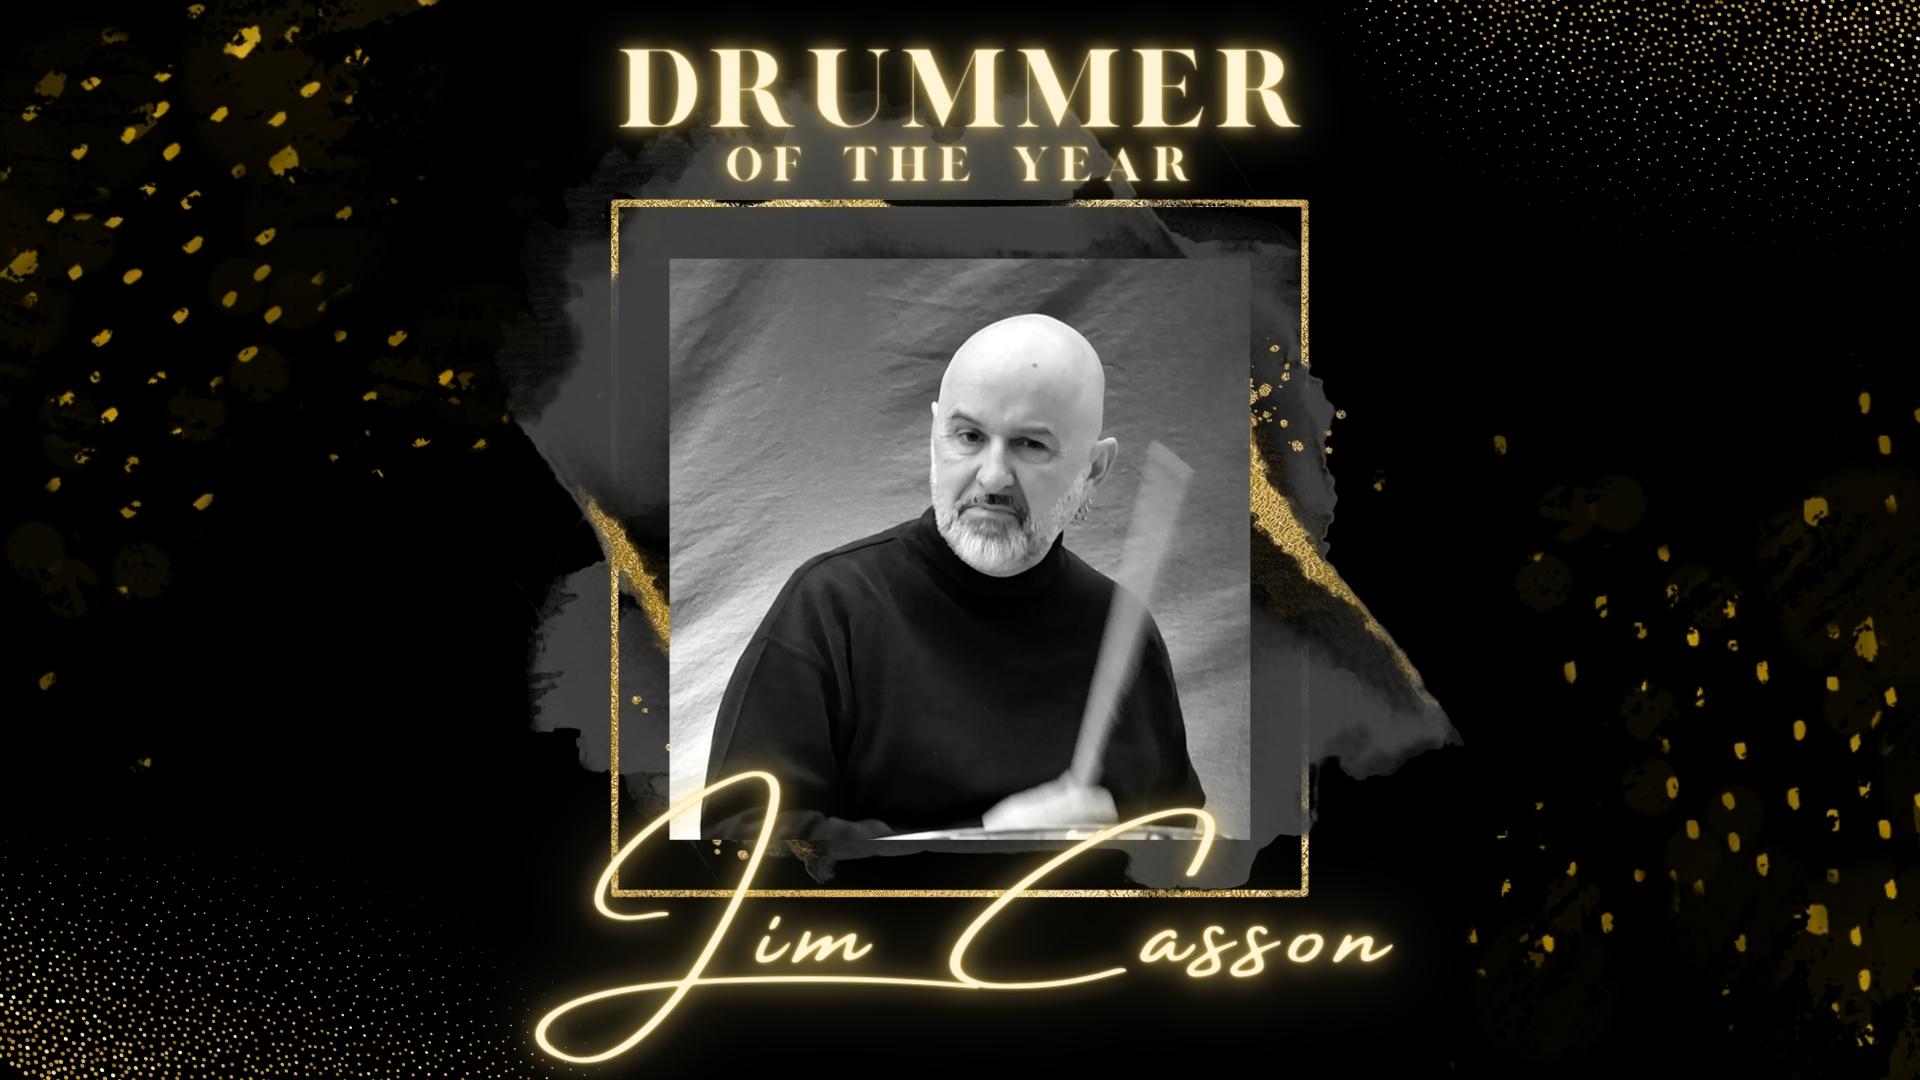 Pelham Musician Jim Casson Awarded Drummer of the Year by Toronto Blues Society